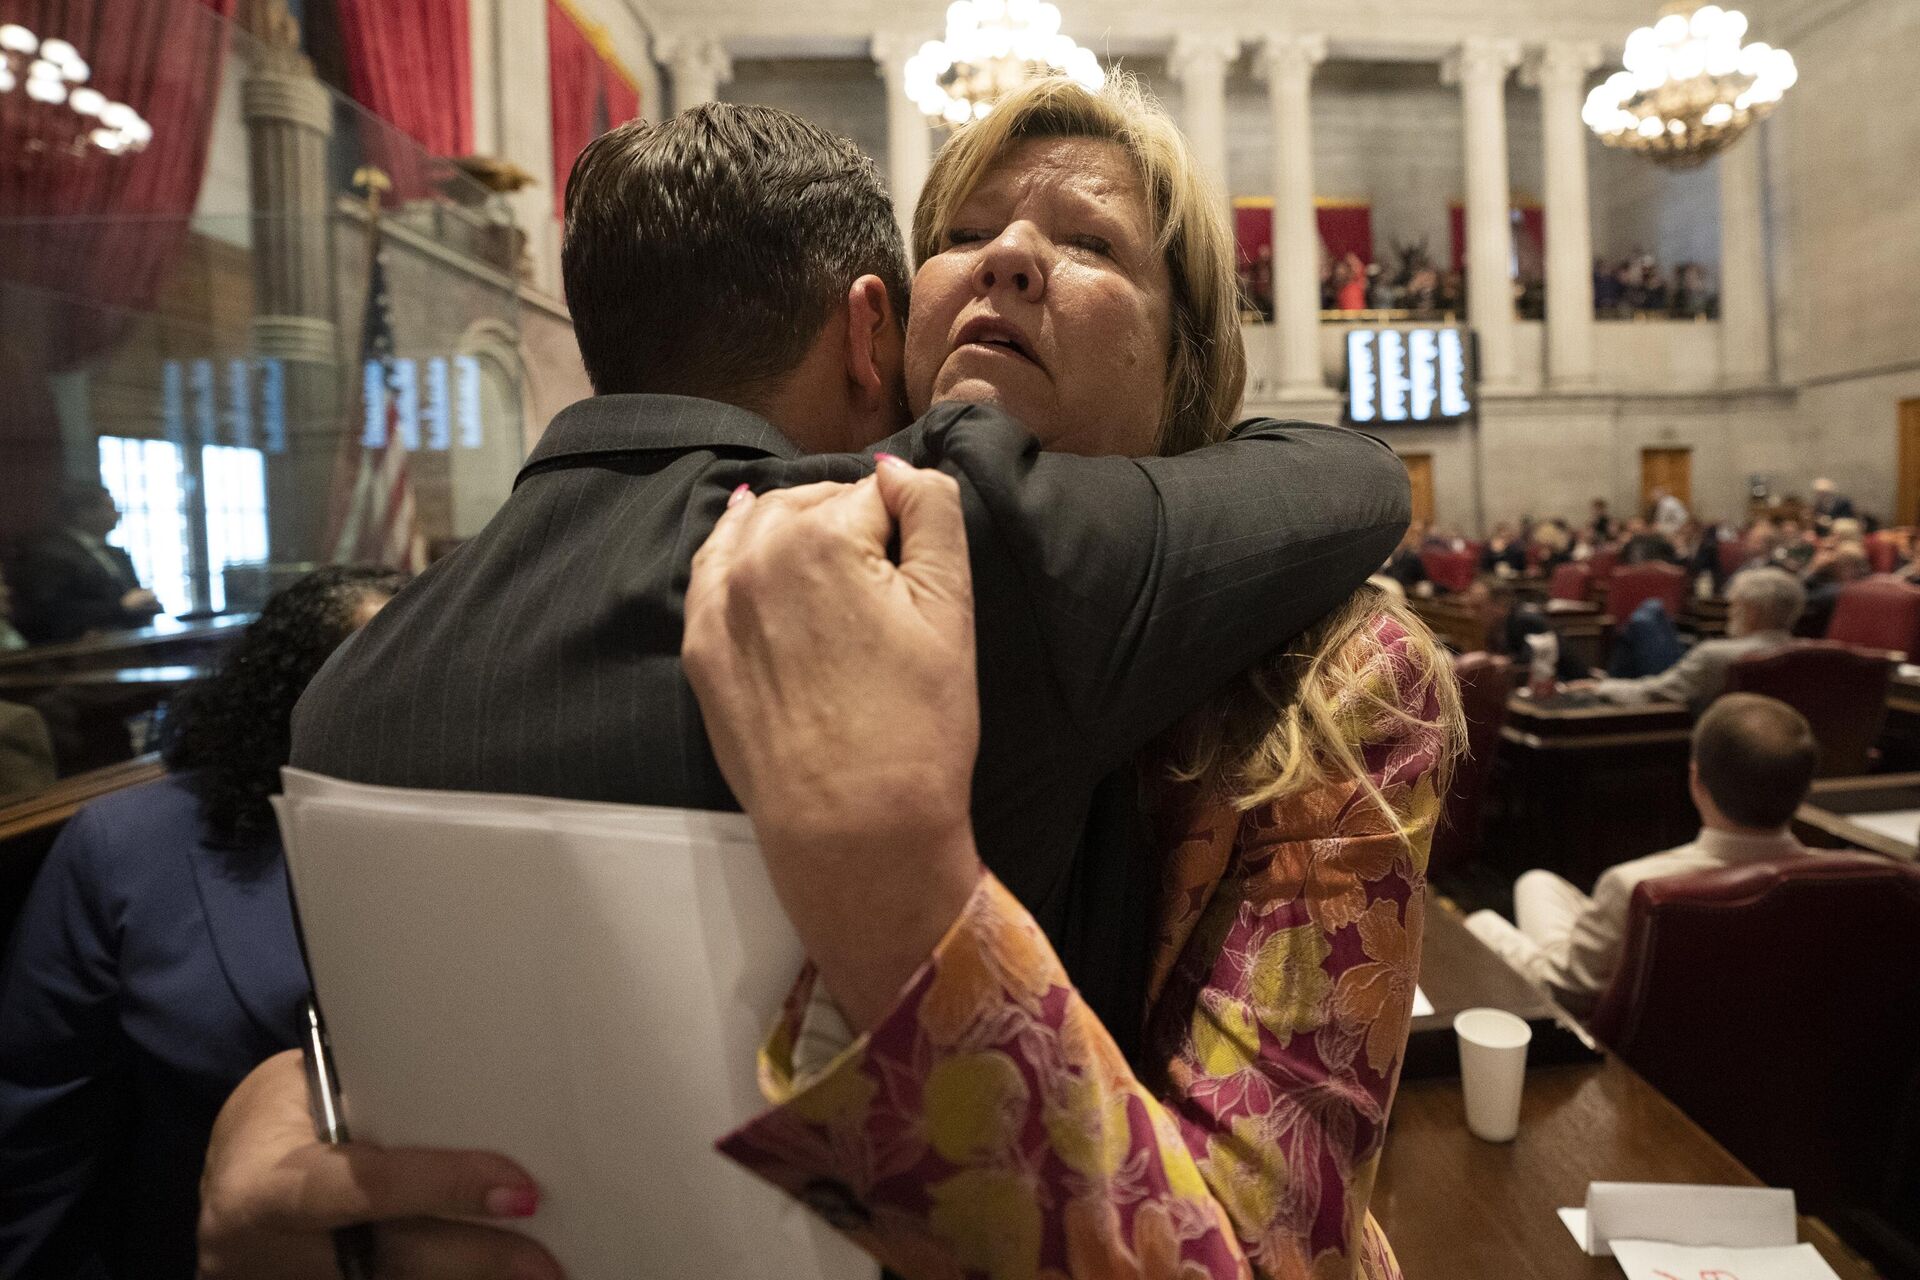 Rep. Gloria Johnson, D-Knoxville, receives a hug from Rep. John Ray Clemmons, D-Nashville, on the floor of the House chamber after a resolution to expel Johnson from the legislature failed on Thursday, April 6, 2023, in Nashville, Tenn. Tennessee Republicans were seeking to oust three House Democrats including Johnson for using a bullhorn to shout support for pro-gun control protesters in the House chamber.  - Sputnik International, 1920, 07.04.2023